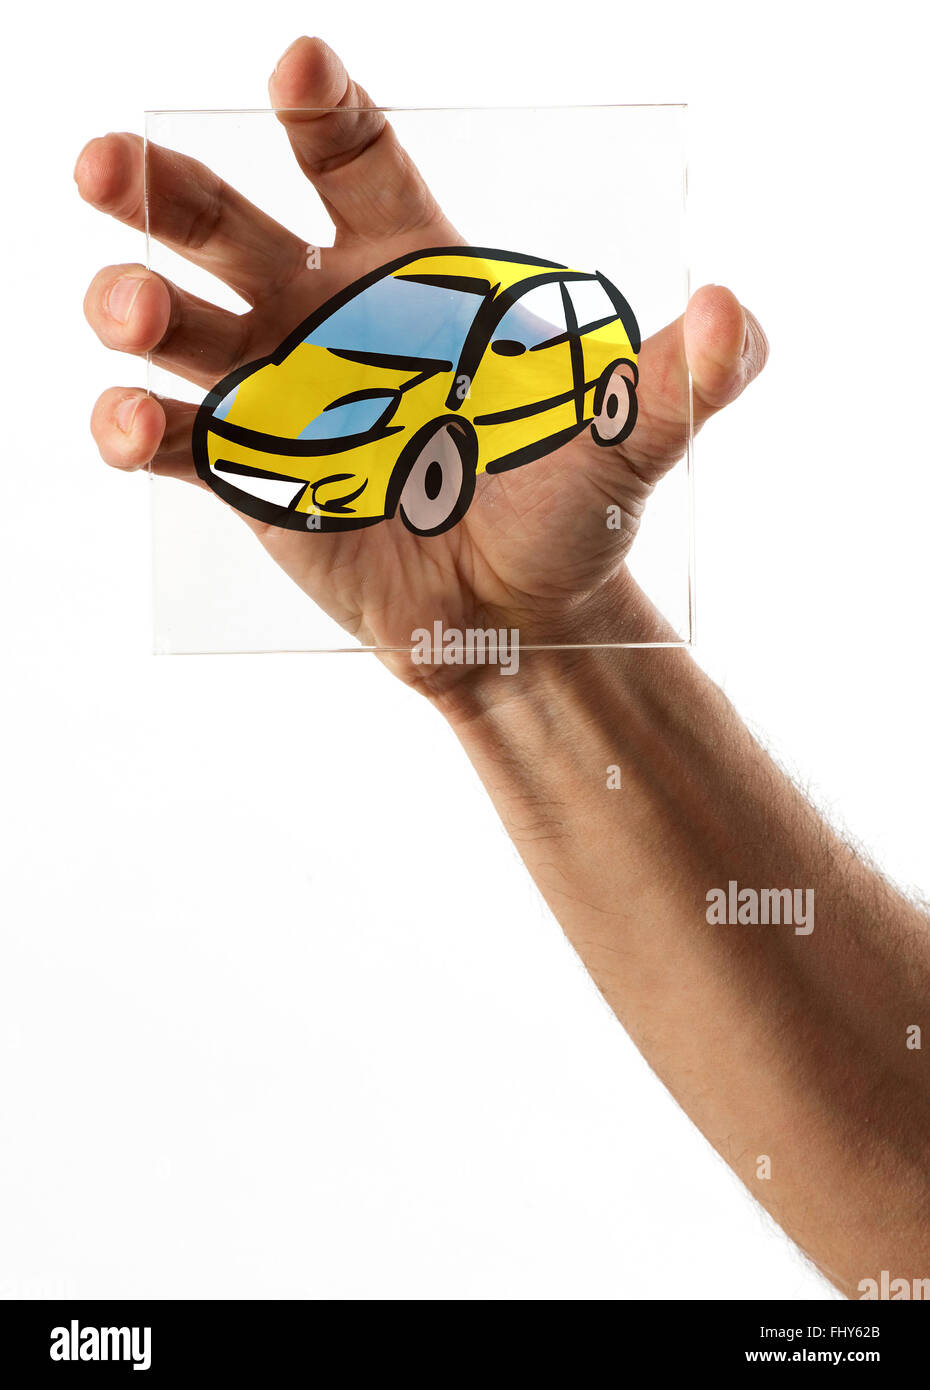 Single hand holding image of yellow cartoon car on square glass plate over white background Stock Photo